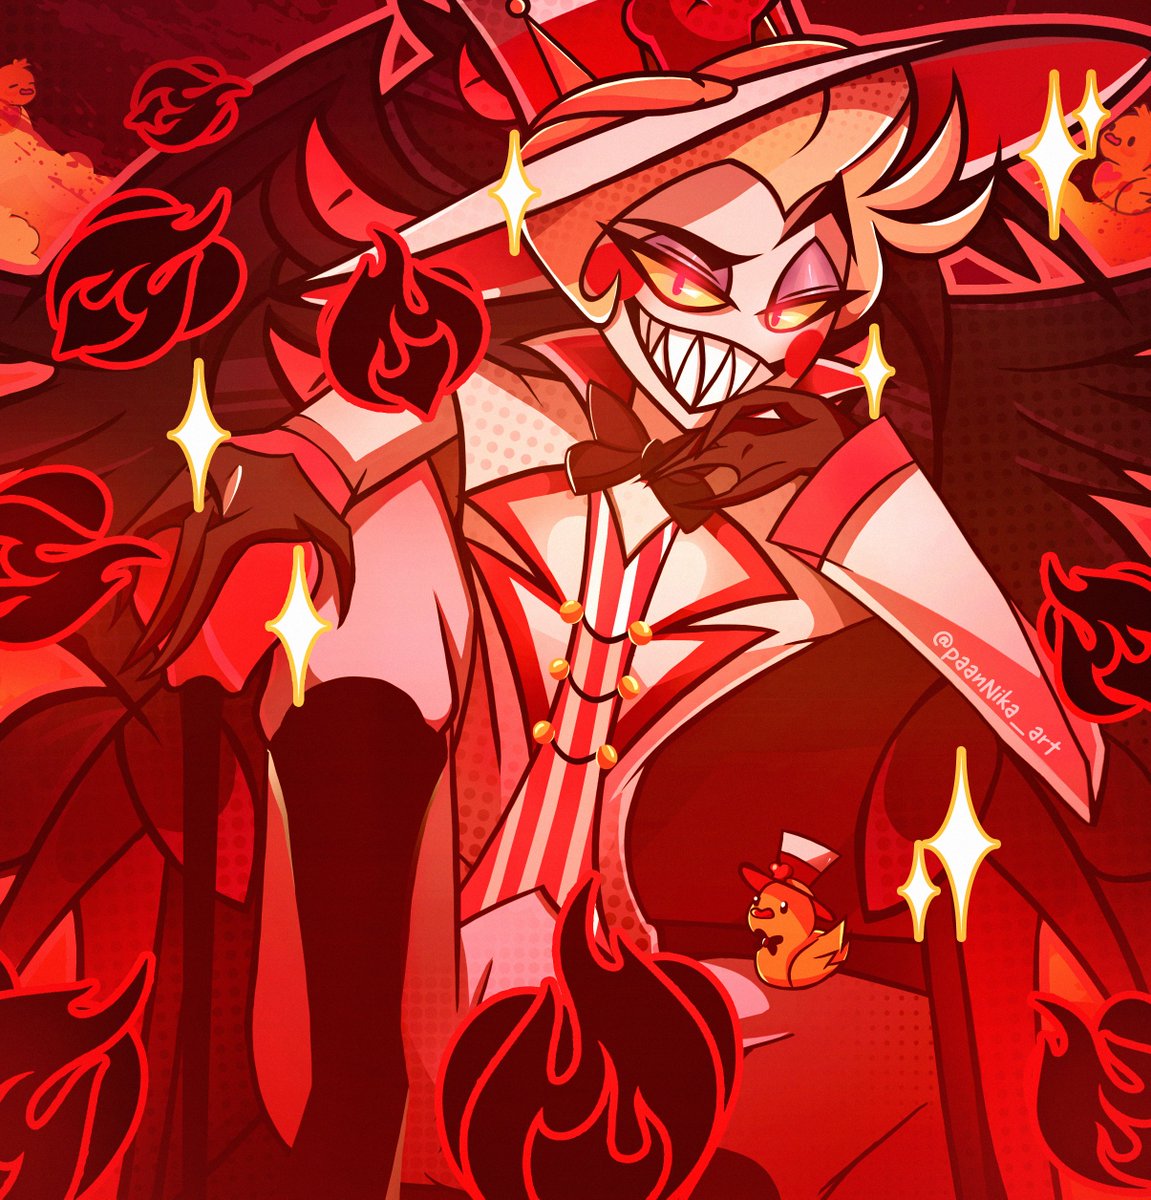 Haha! Looks like you could use some help 
From the Big Boss of Hell ❤️‍🔥

 #HazbinHotel #art #Lucifer #fanart #Hazbinhotellucifer #hazbinhotelart #hazbinhotelfanart #luciferart #LuciferFanart #LuciferMorningstar